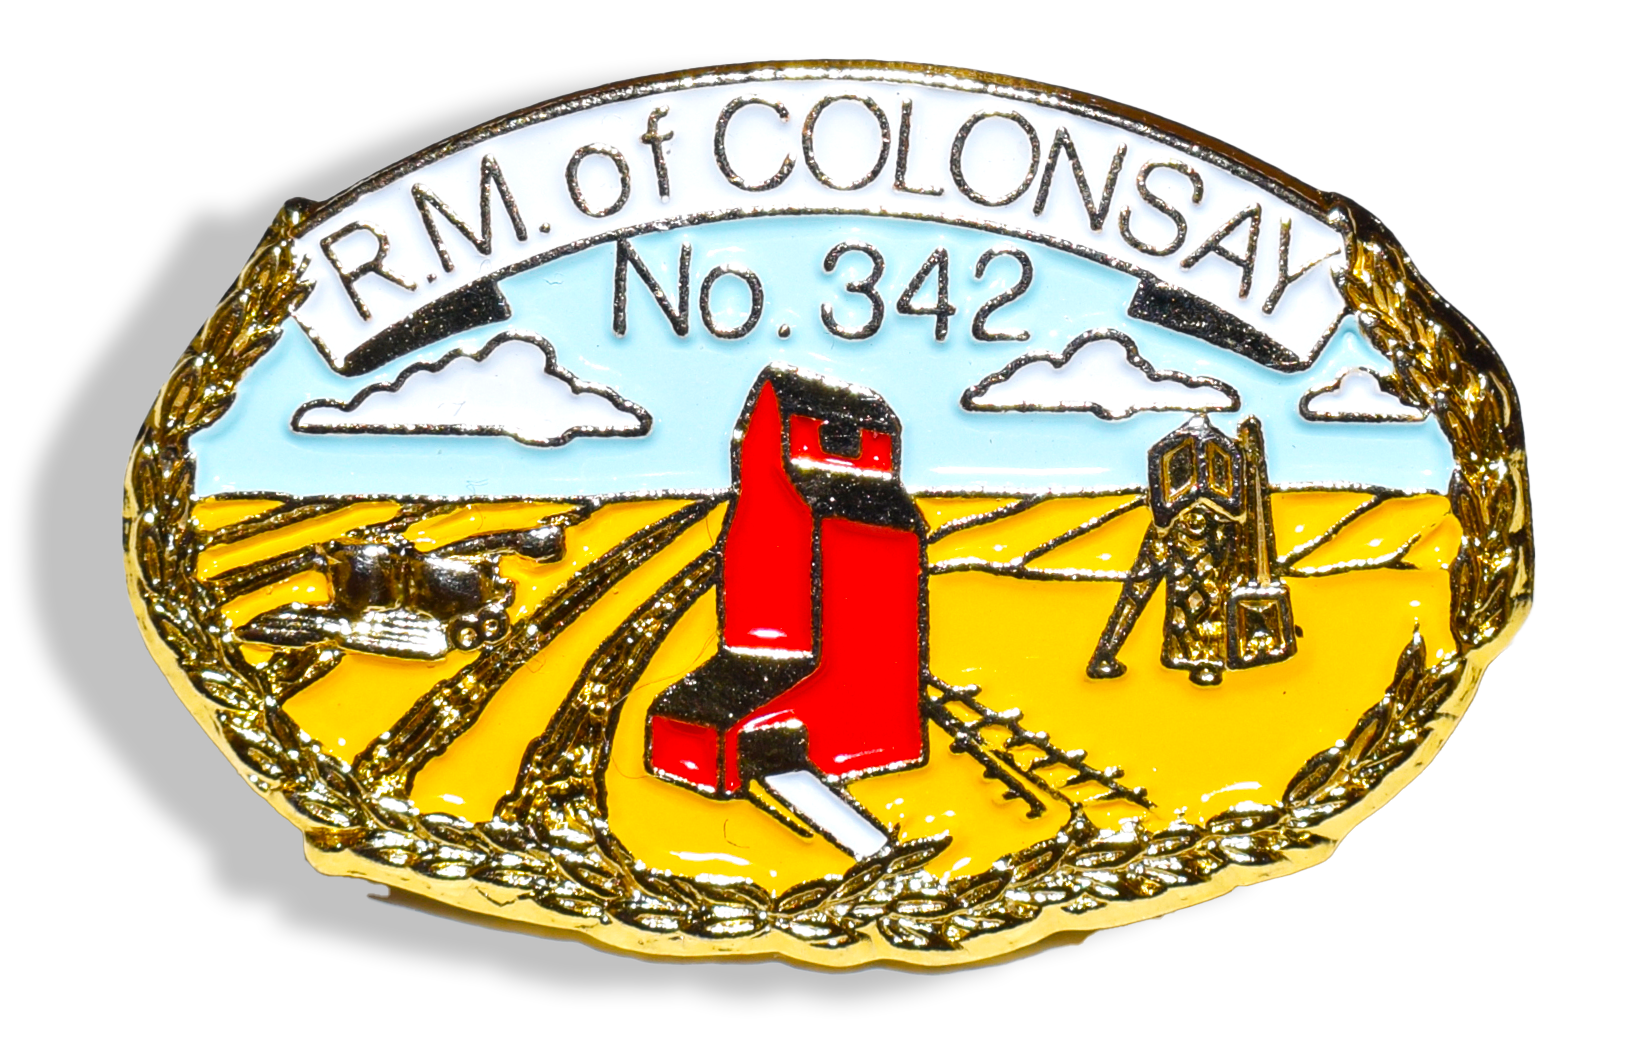 A badge that says r.m. of colonsay no.342